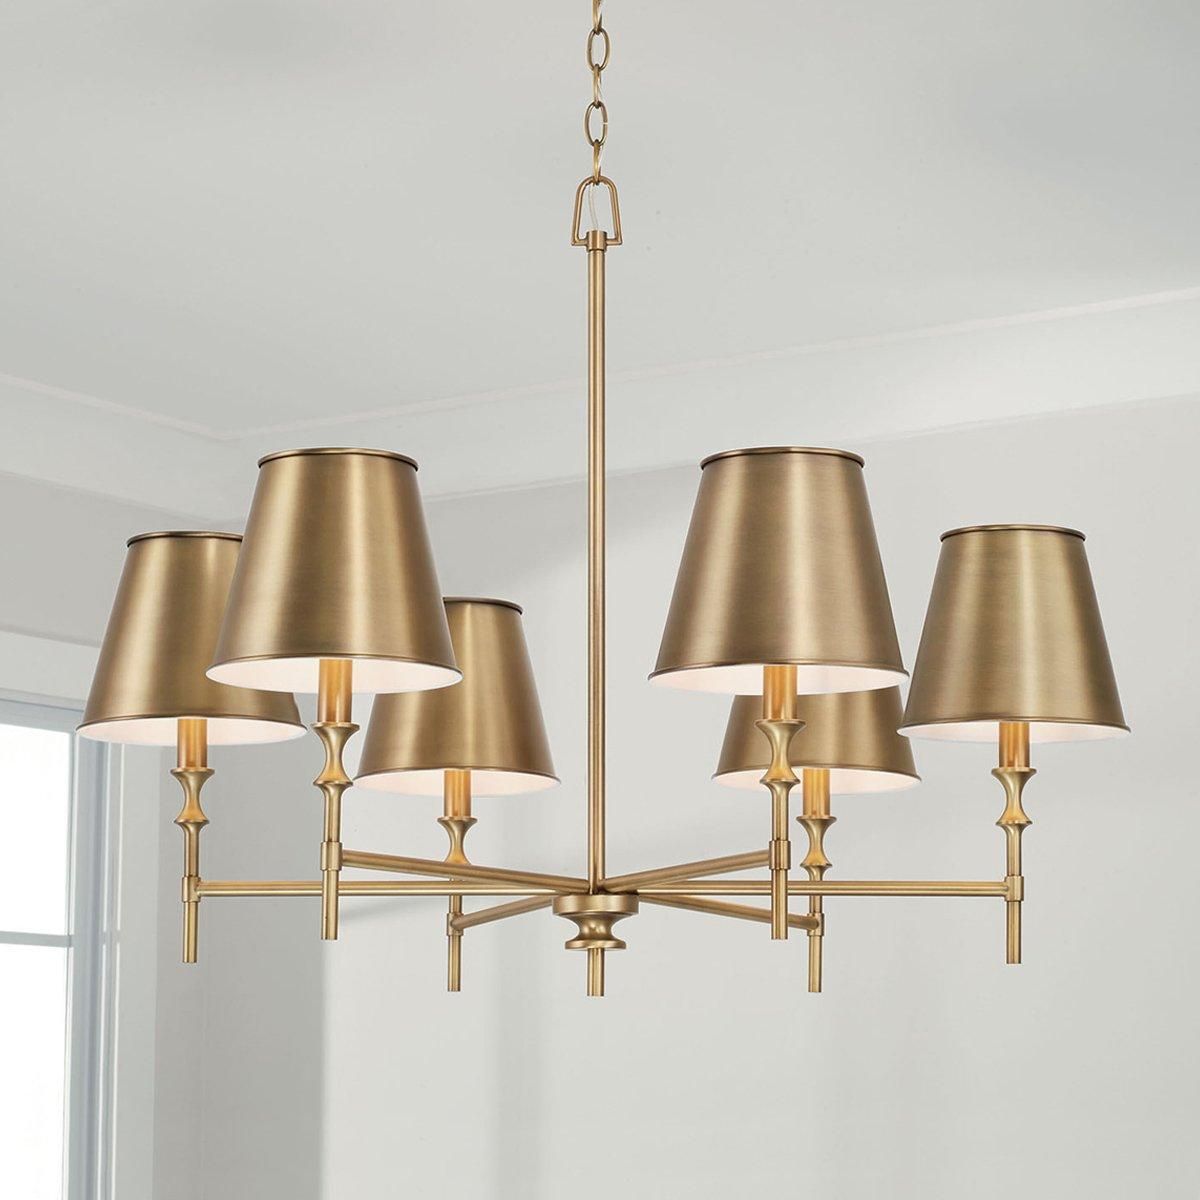 Antigue Chandelier | Shades of Light